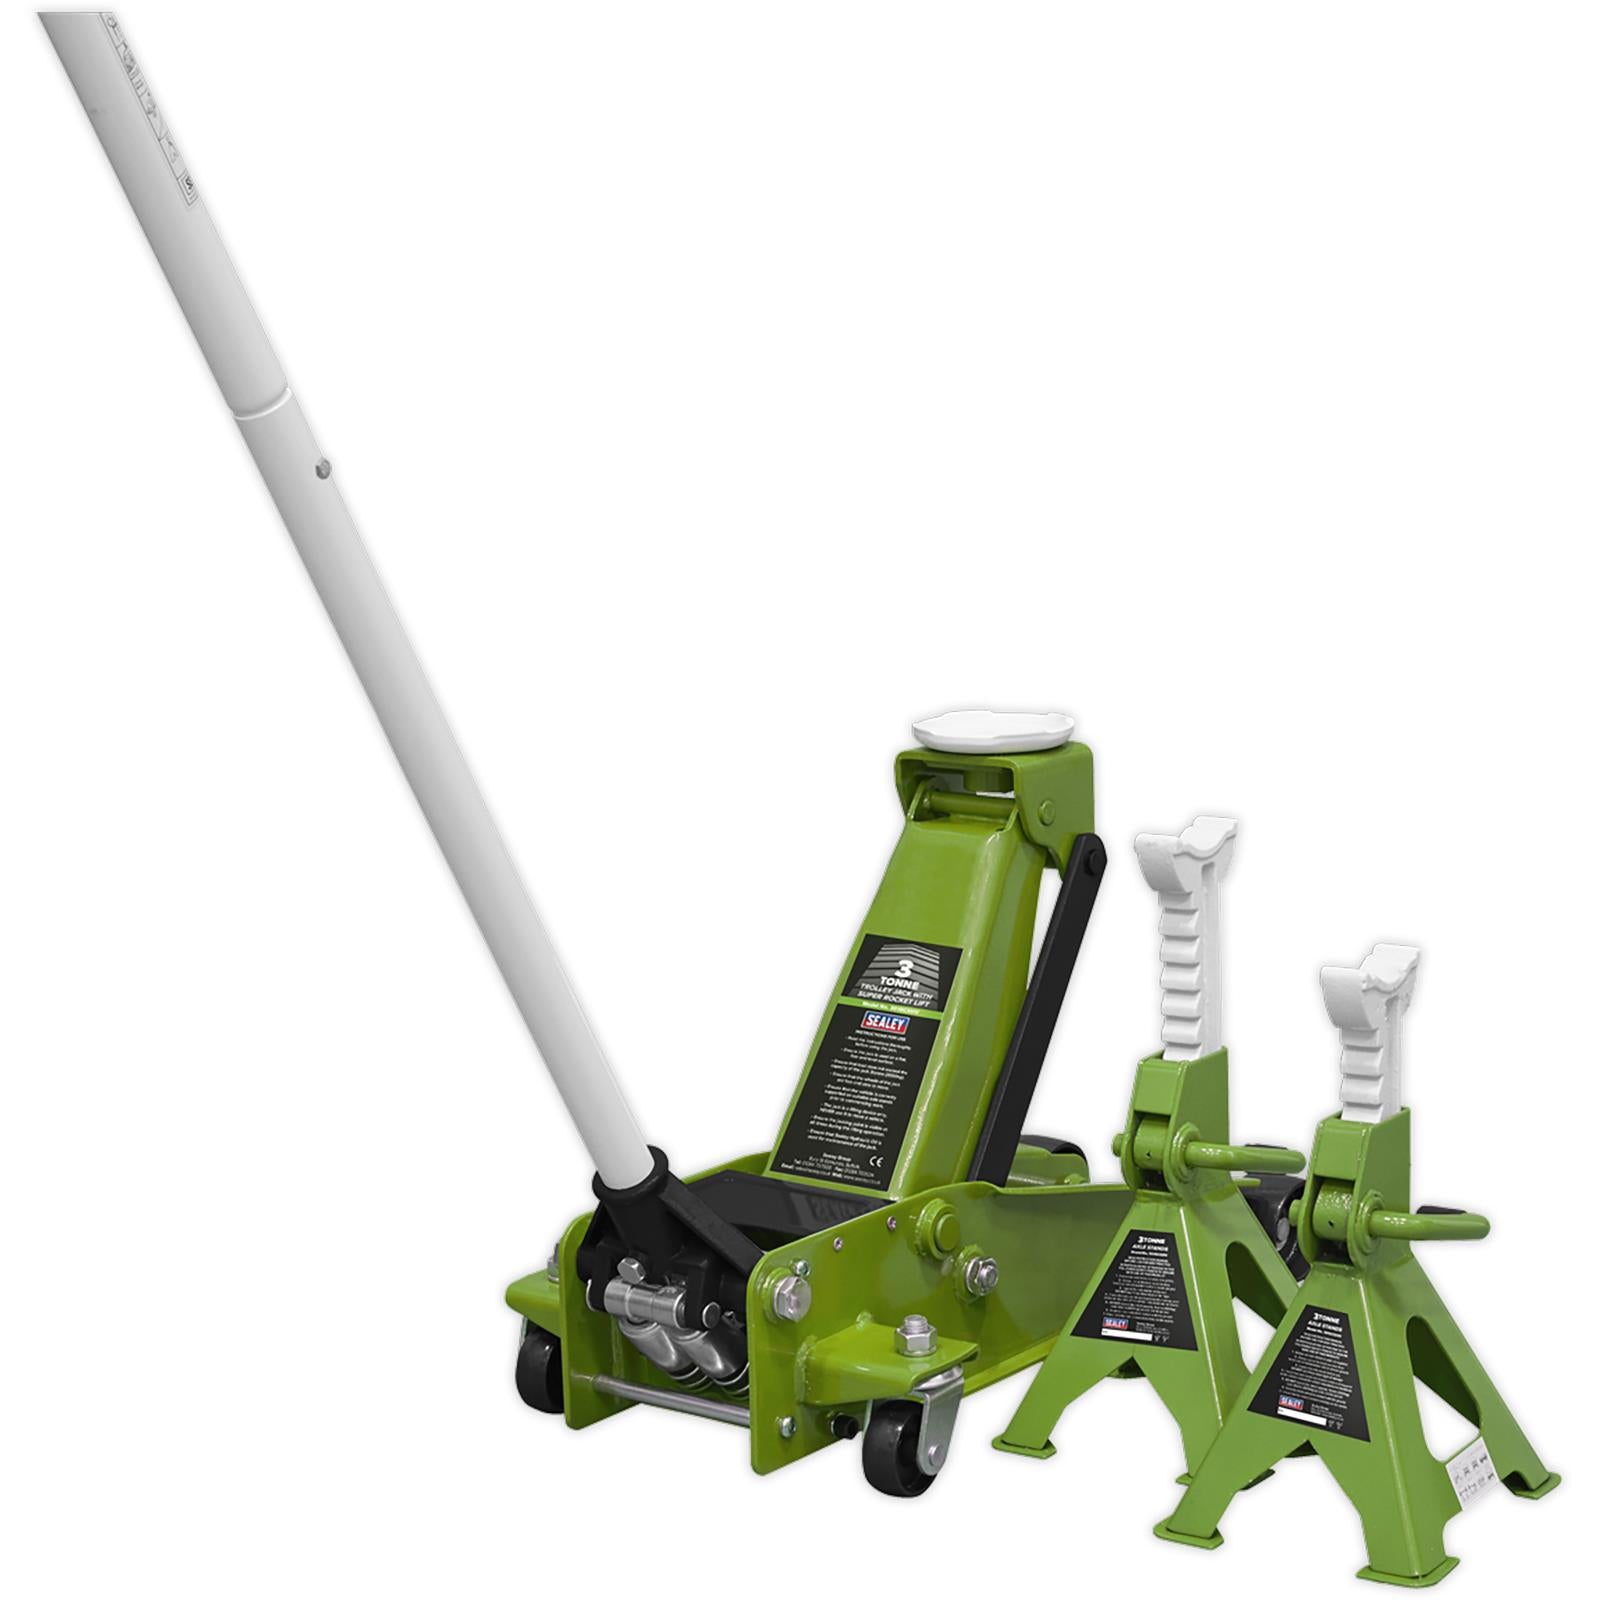 Sealey Trolley Jack with Super Rocket Lift 3 Tonne & Axle Stands (Pair) 3 Tonne Capacity per Stand - Green